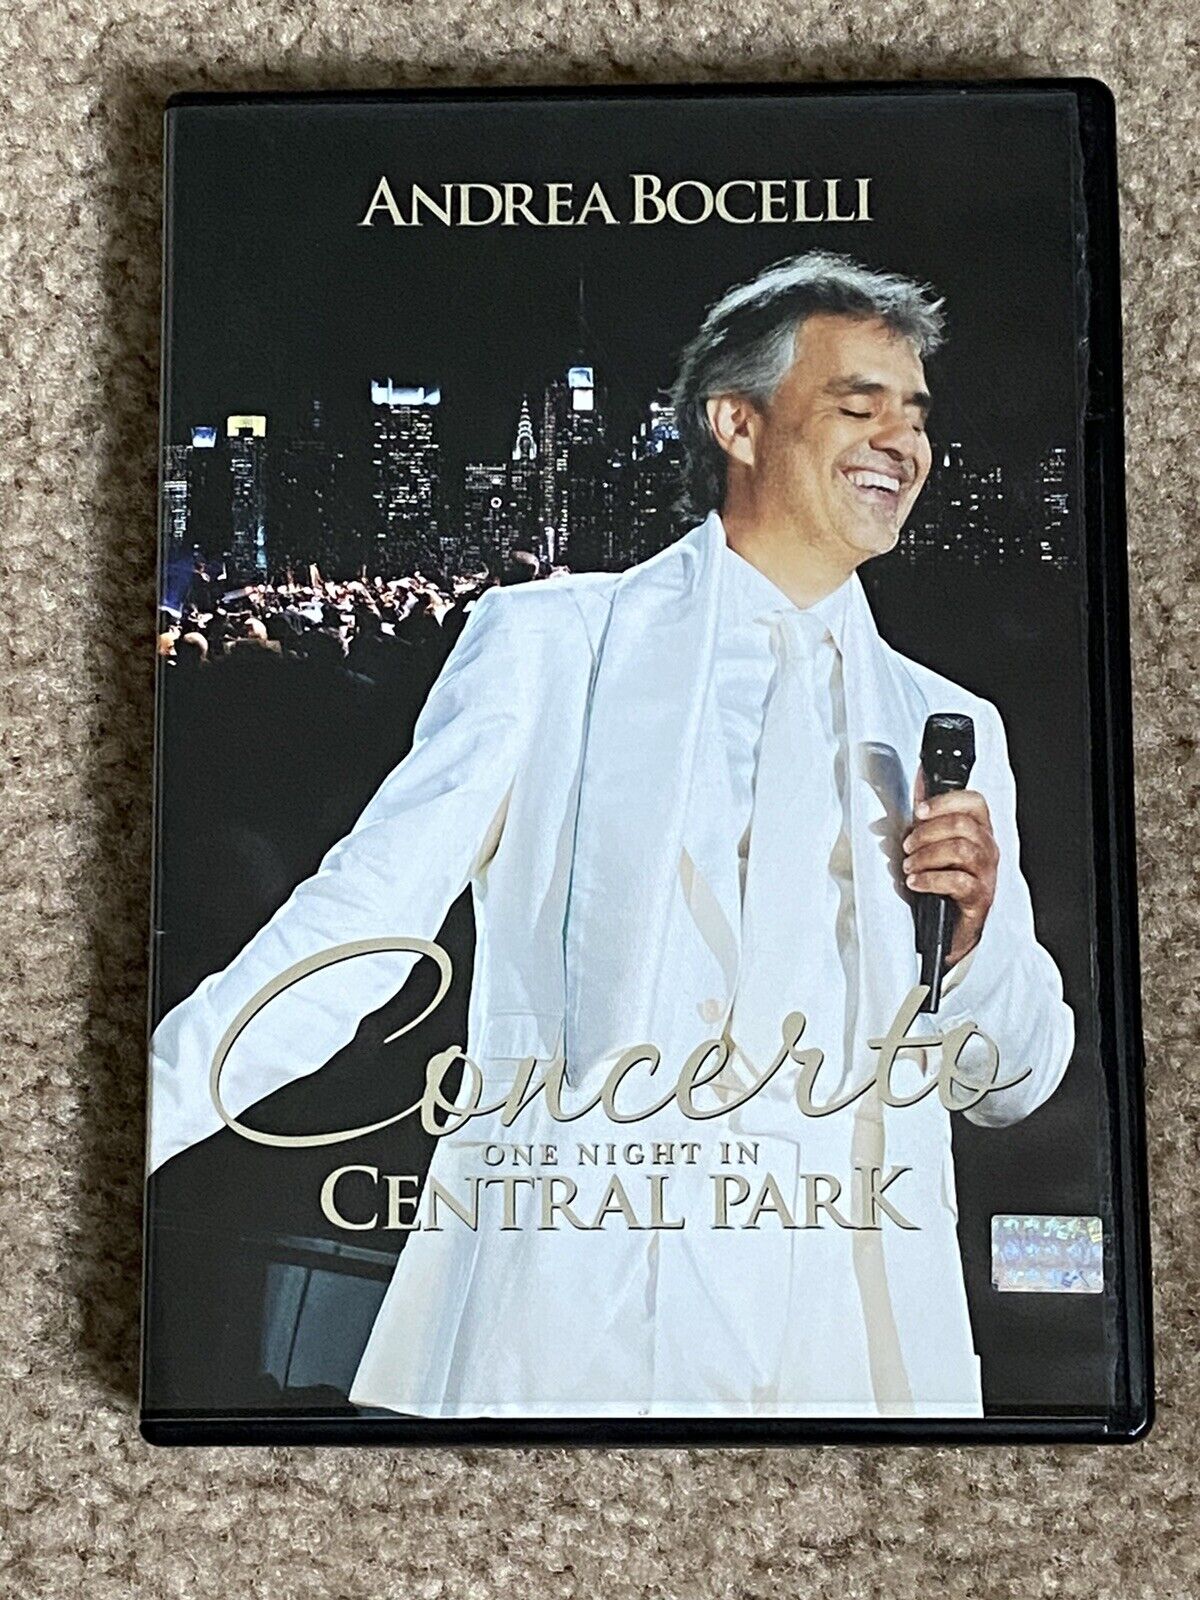 ANDREA BOCELLI: DVD Collection Bundle - 5 DVD's in this Bundle ...